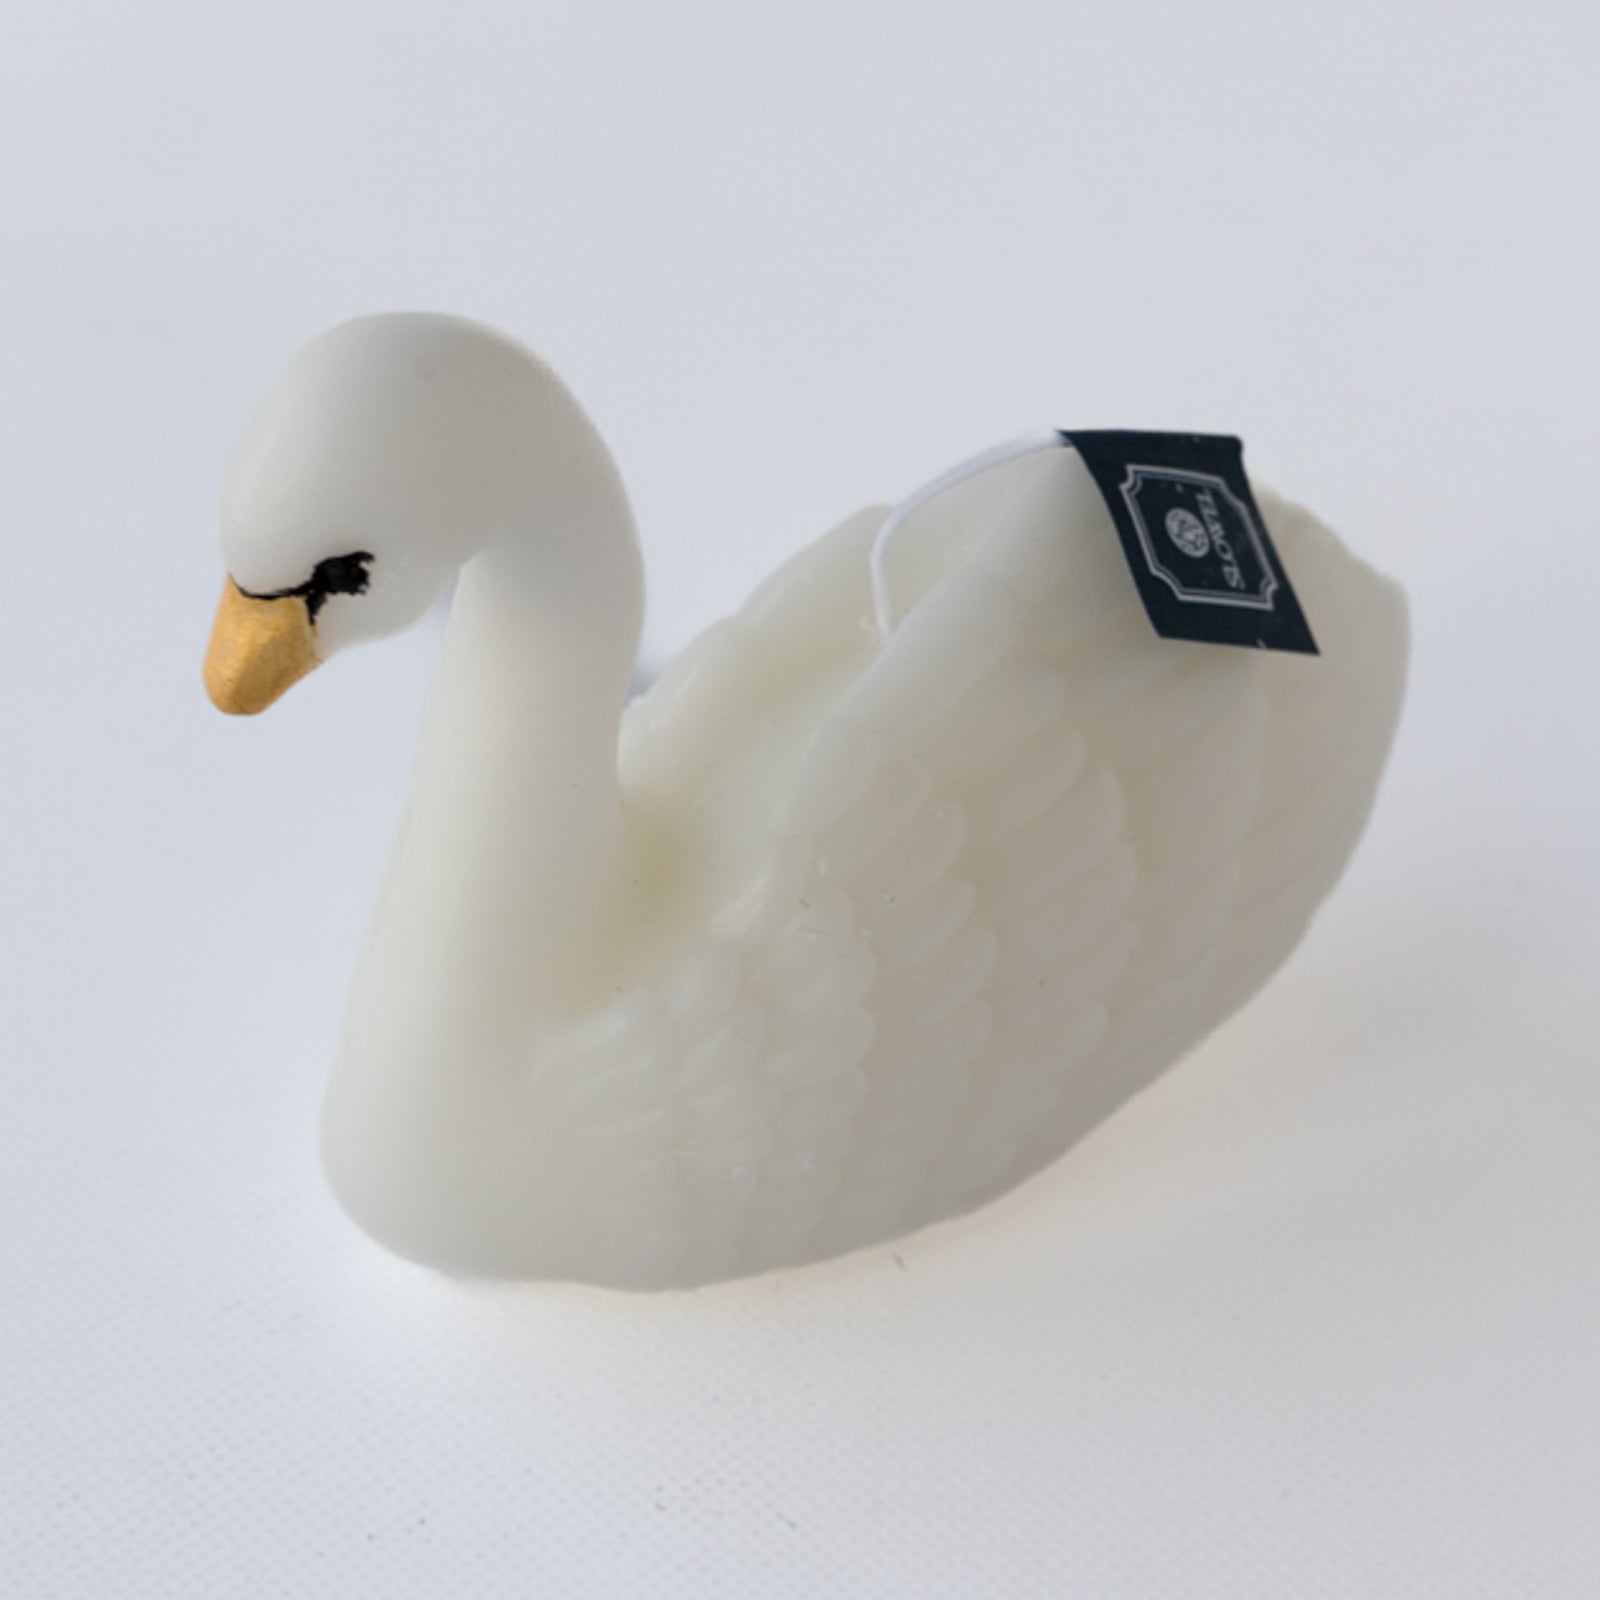 SLOWEL CANDLE Swan object candle